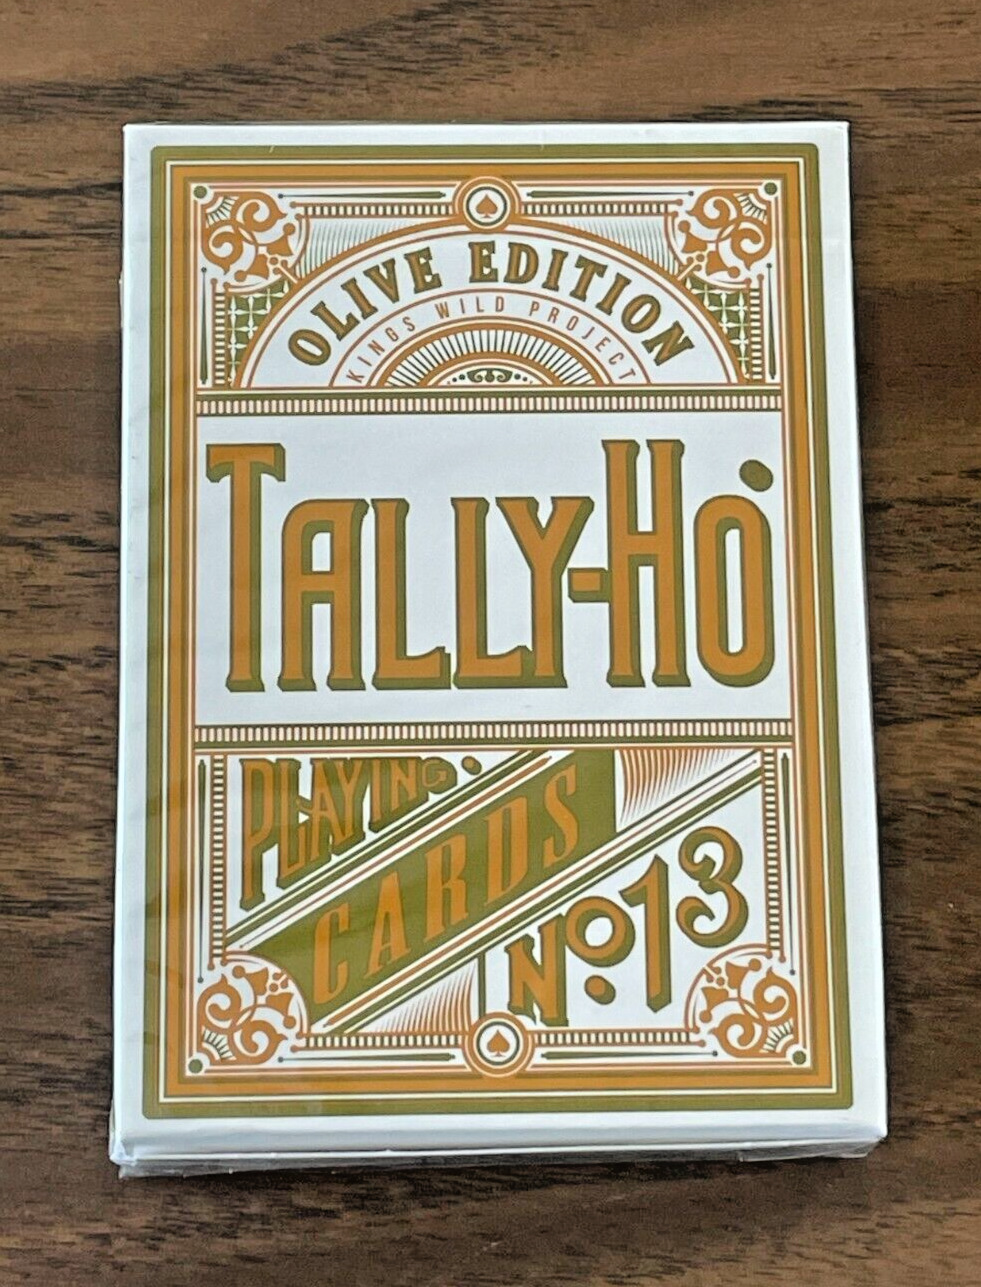 TALLY-HO #13 | OLIVE Edition Playing Cards | 2018 | KWP | Jackson Robinson {NEW}